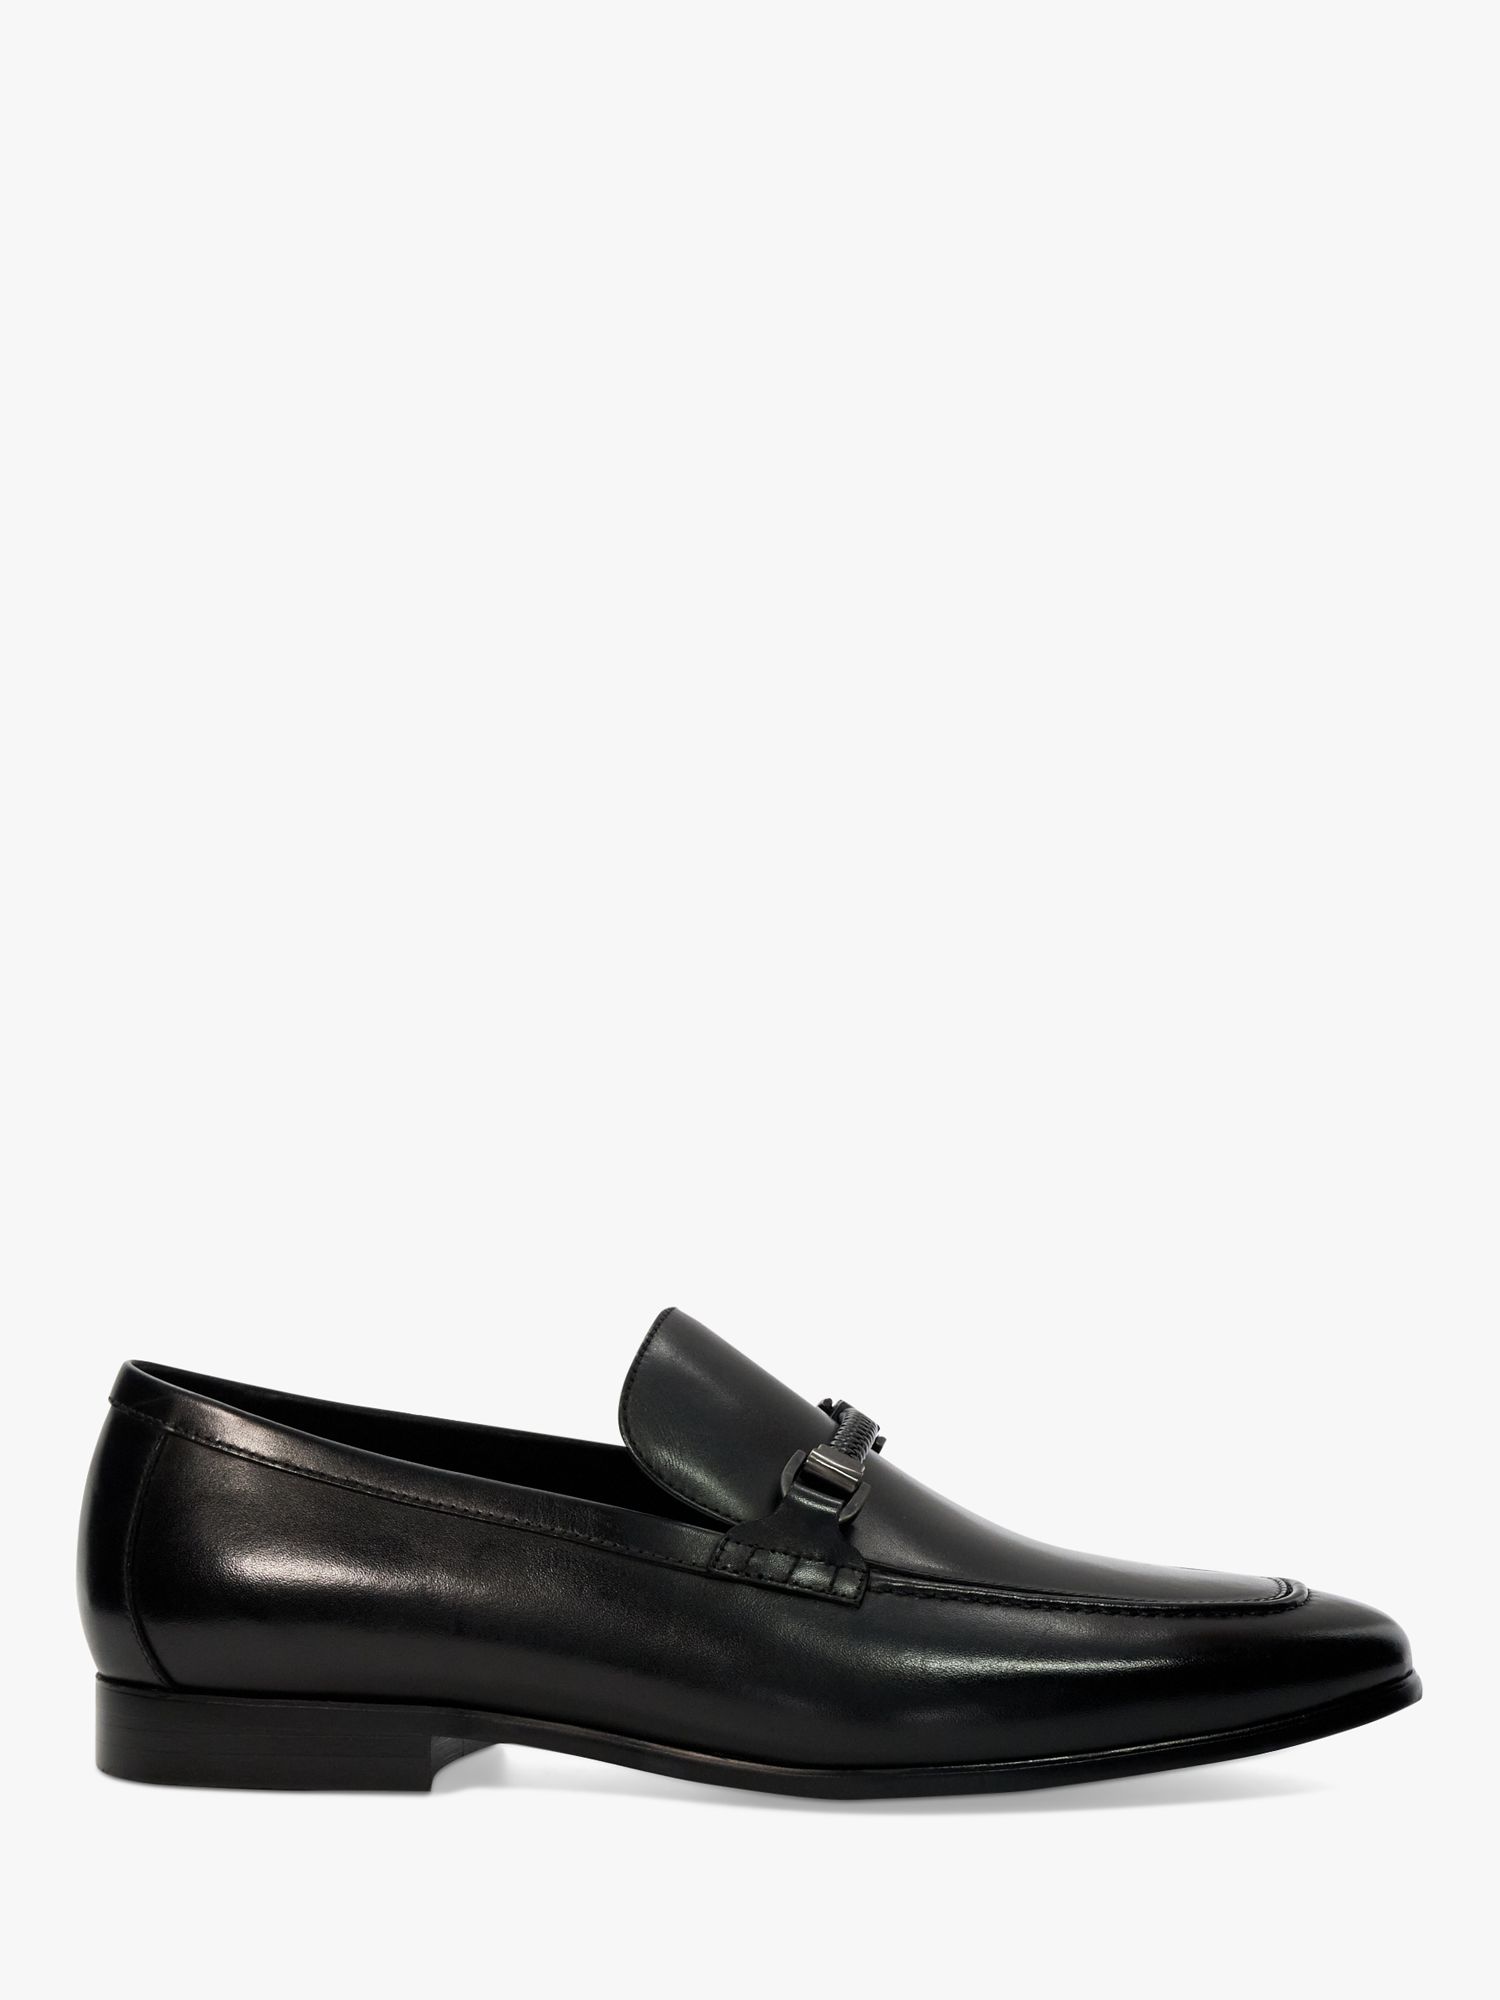 Dune Scilly Leather Loafers, Black, 9